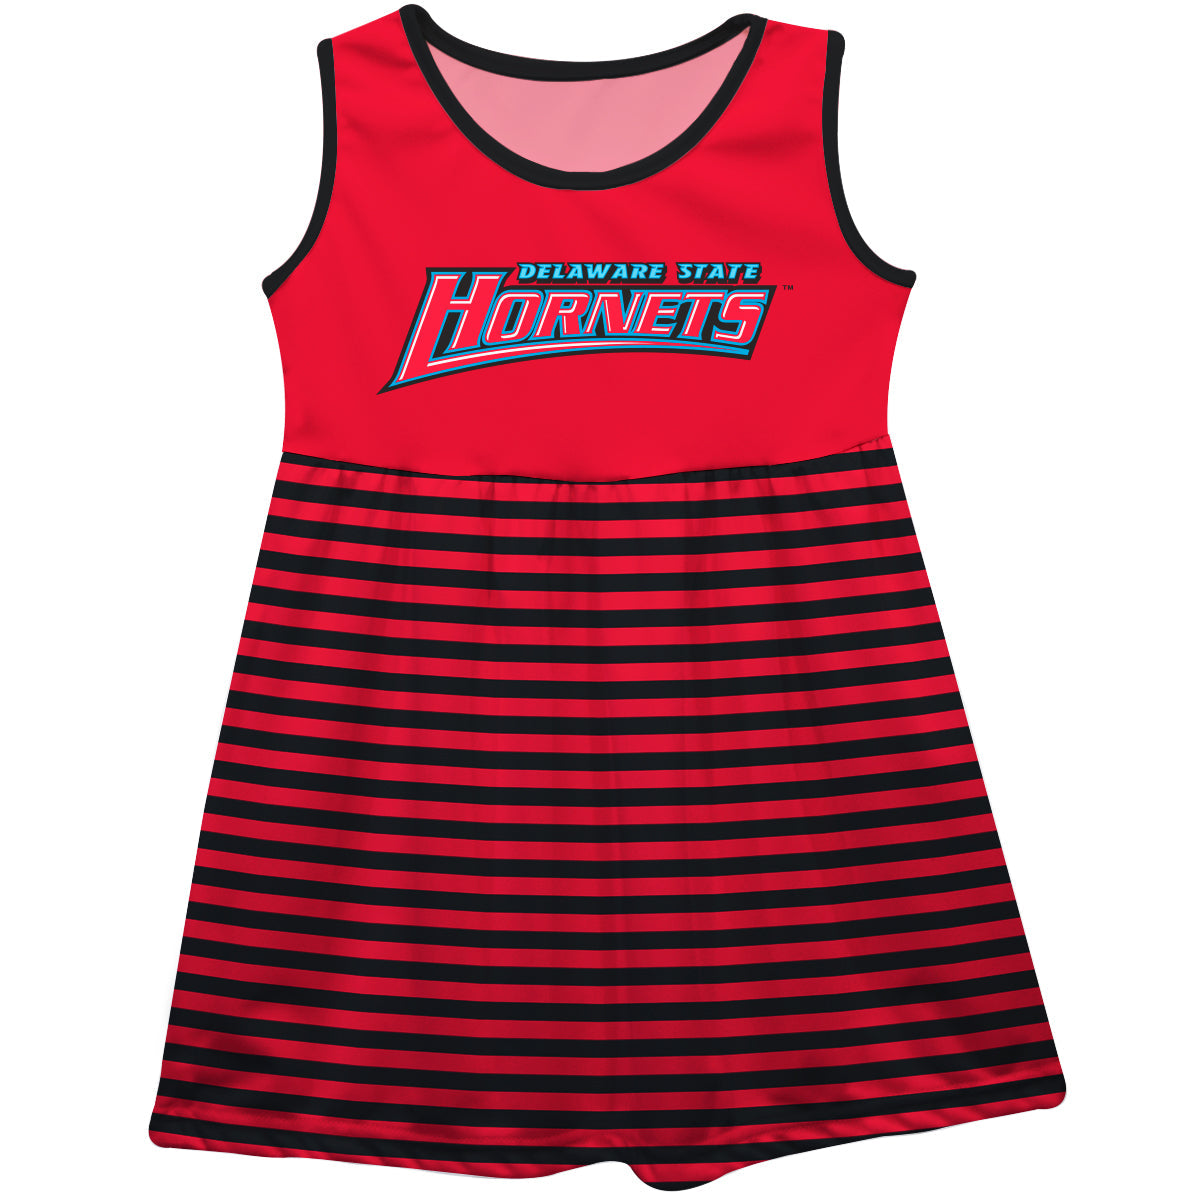 Delaware State University Hornets Red and Black Sleeveless Tank Dress with Stripes on Skirt by Vive La Fete-Campus-Wardrobe